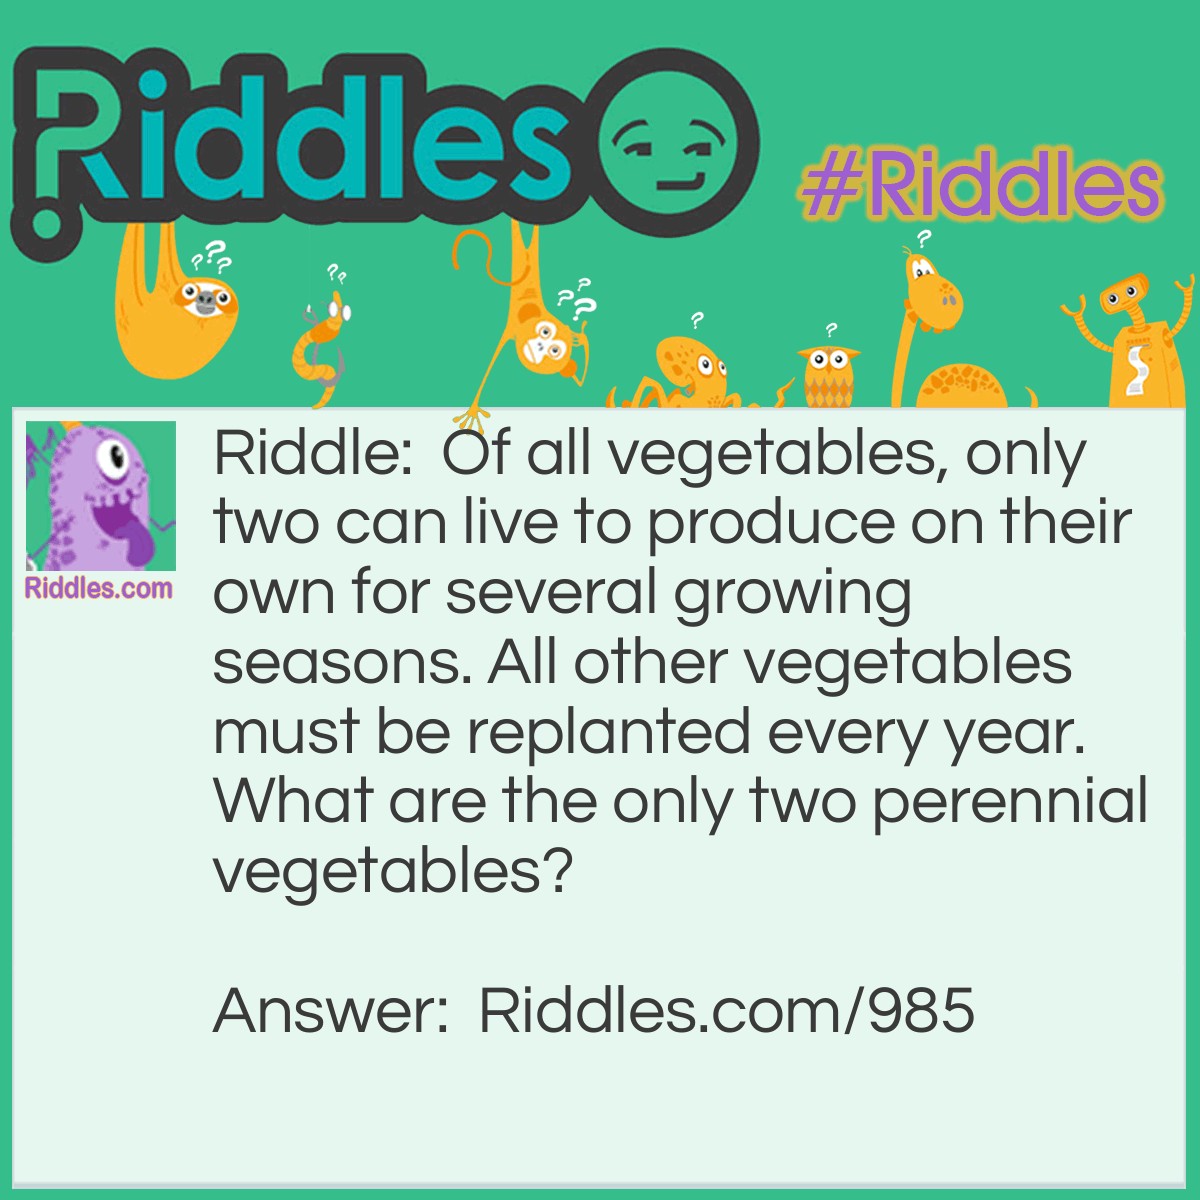 Riddle: Of all vegetables, only two can live to produce on their own for several growing seasons. All other vegetables must be replanted every year. What are the only two perennial vegetables? Answer: Asparagus and rhubarb.